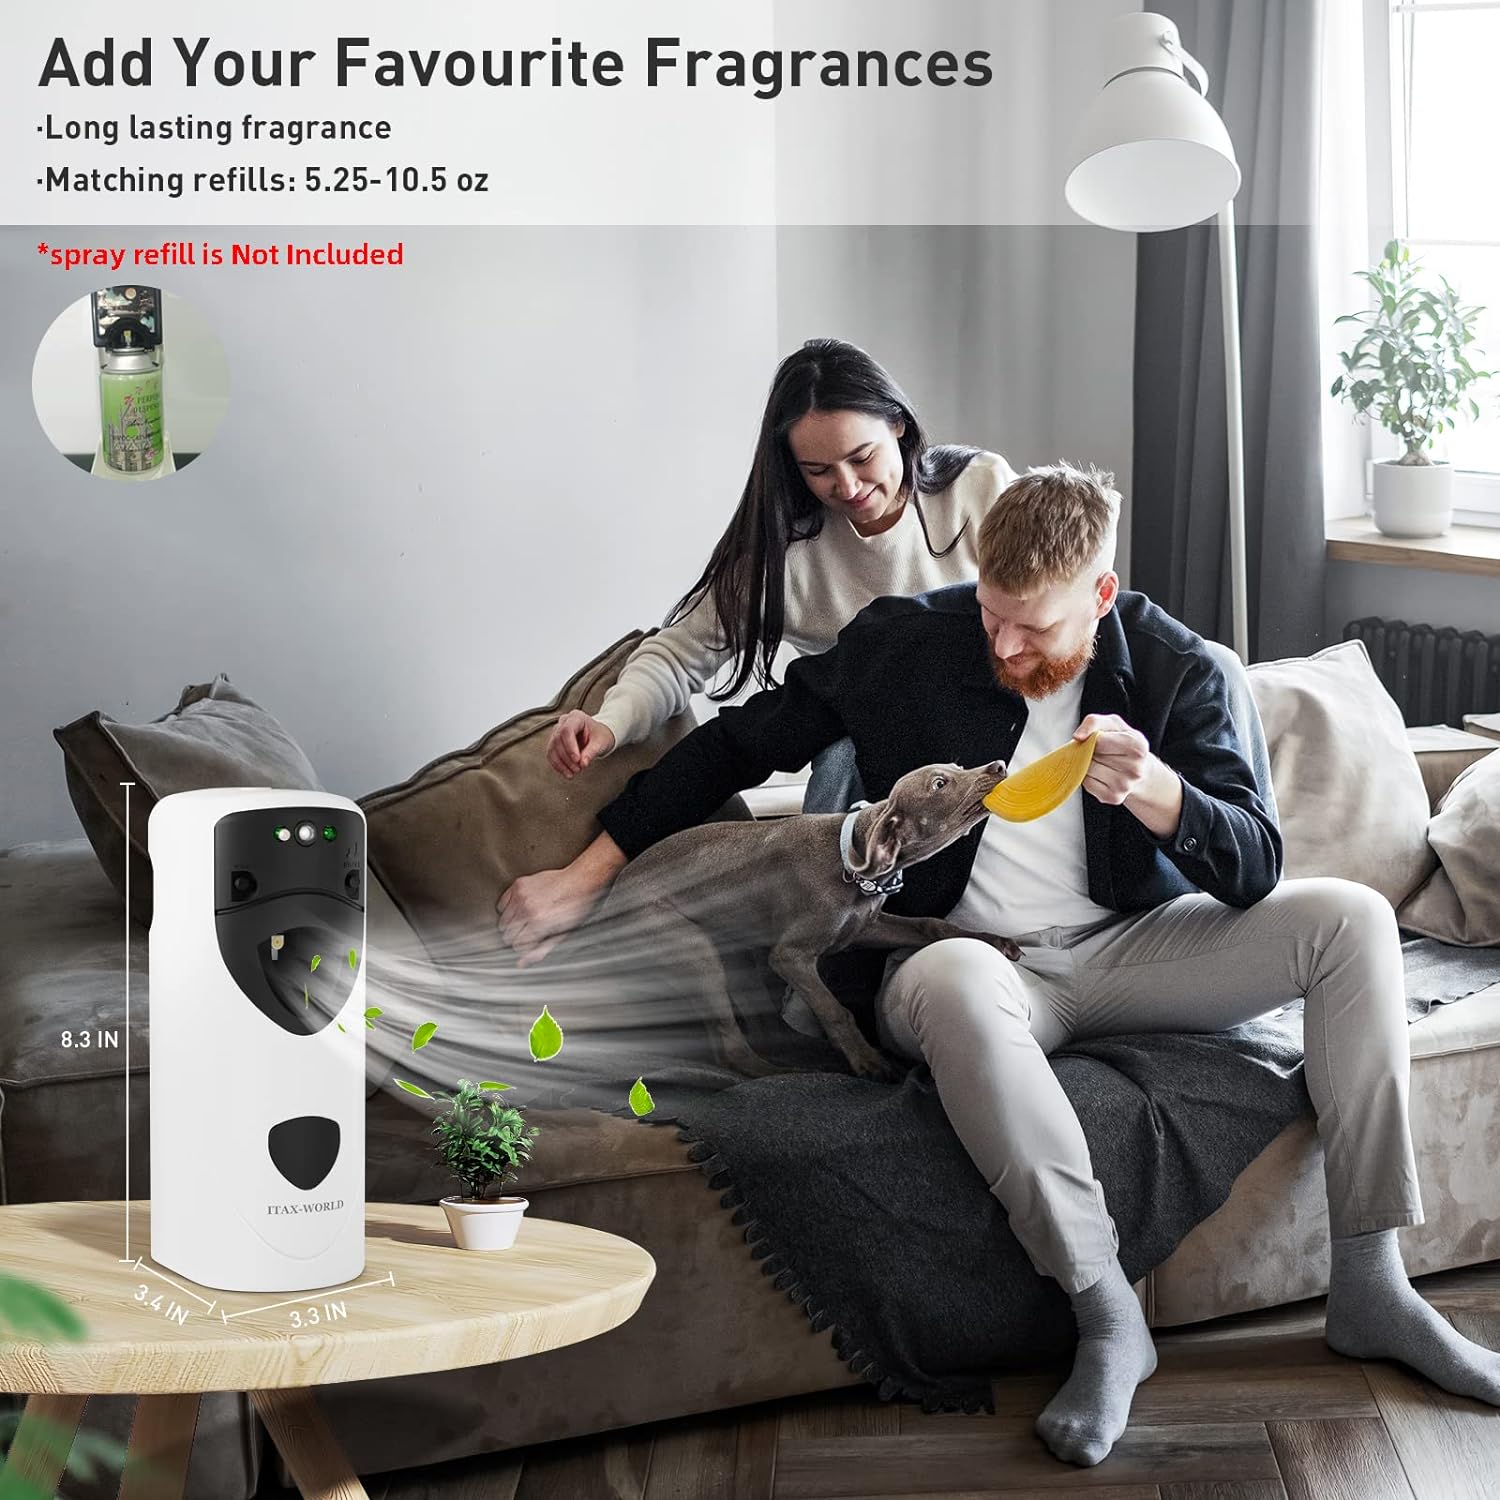 ITAX-WORLD Automatic Air Freshener Spray Dispenser with Remote Programmable Fragrance Dispenser Fit for Spray Refills | Wall Mount Aerosol Dispenser Spray Holder for Home Bathroom Commercial Place : Industrial & Scientific